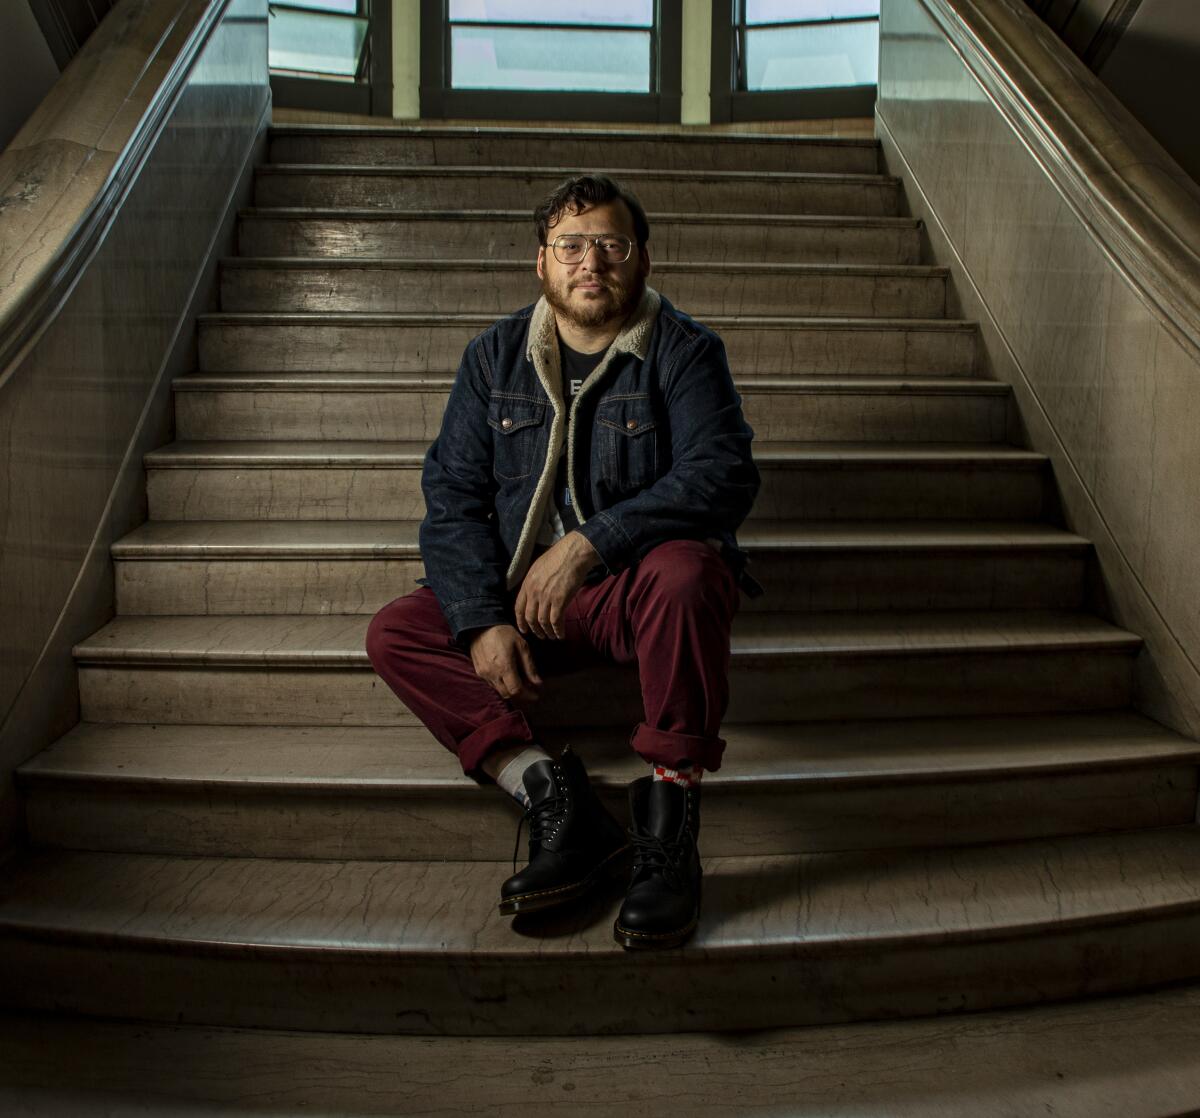 christopher oscar peña sits on the interior steps of an apartment building.